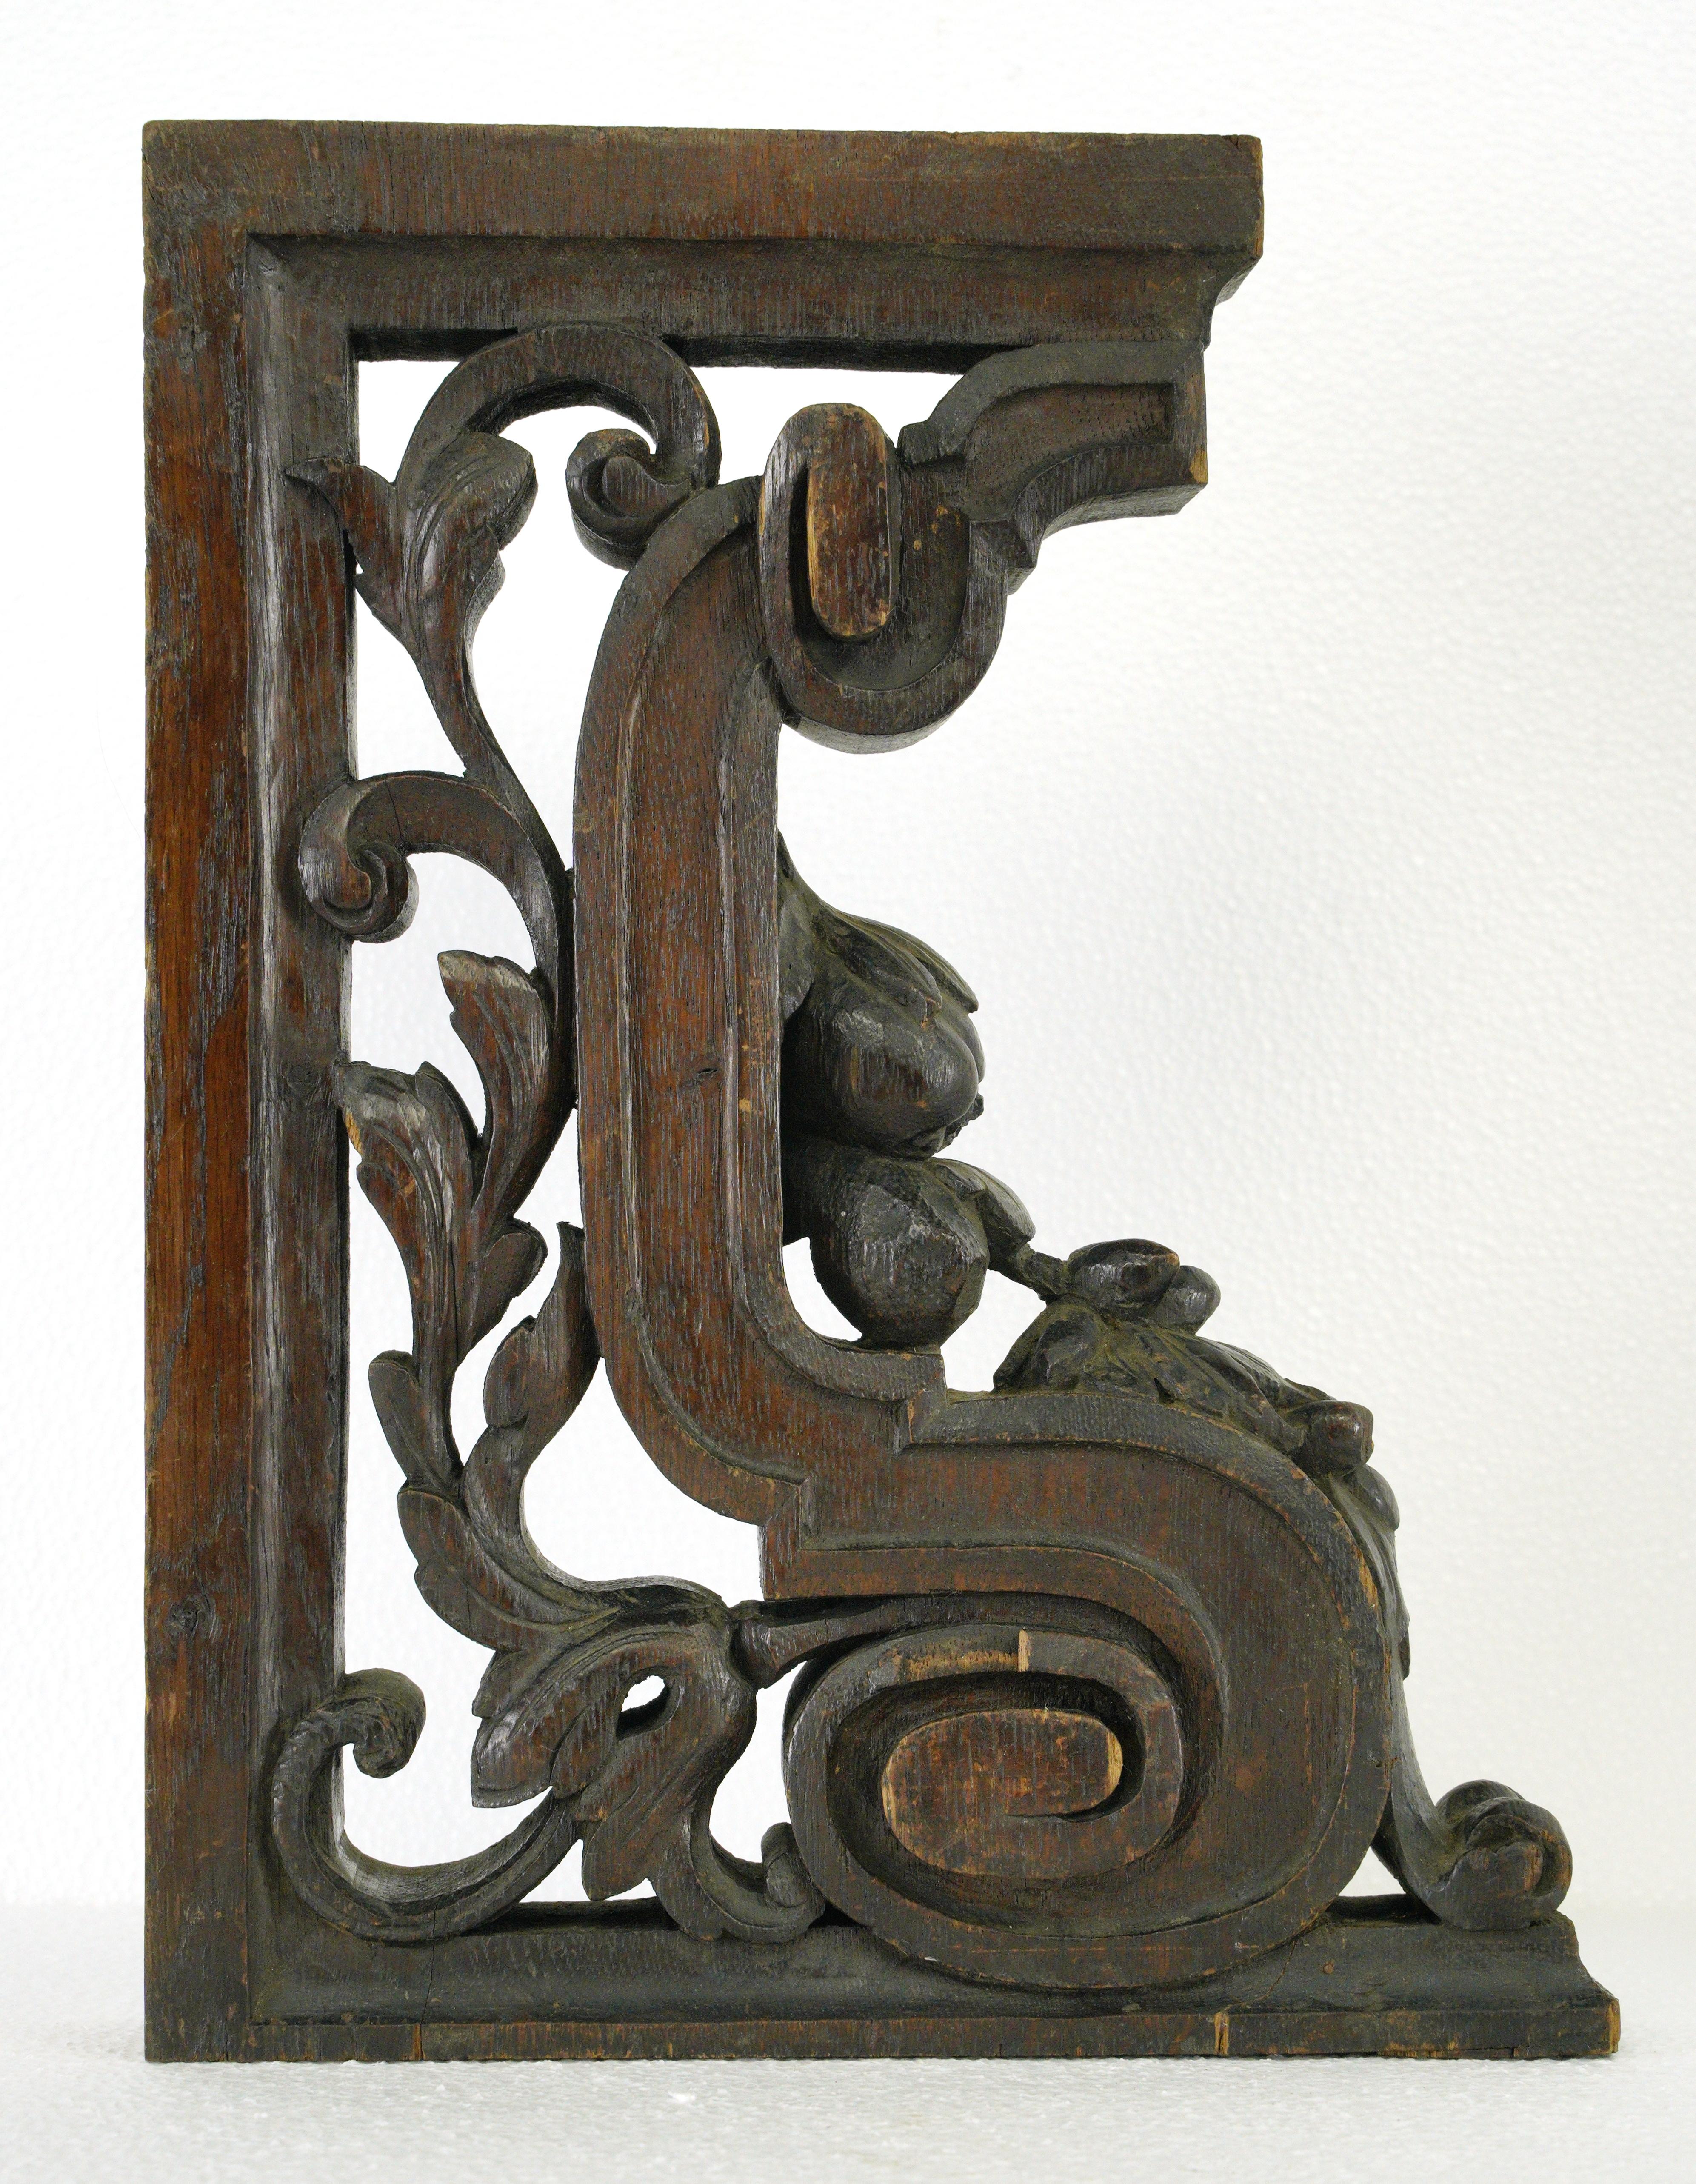 Dark tone solid oak hand carved decorative brackets. Good condition with appropriate wear from age, with one displaying a minor chip and crack. Priced as a pair. Please note, this item is located in our Scranton, PA location.